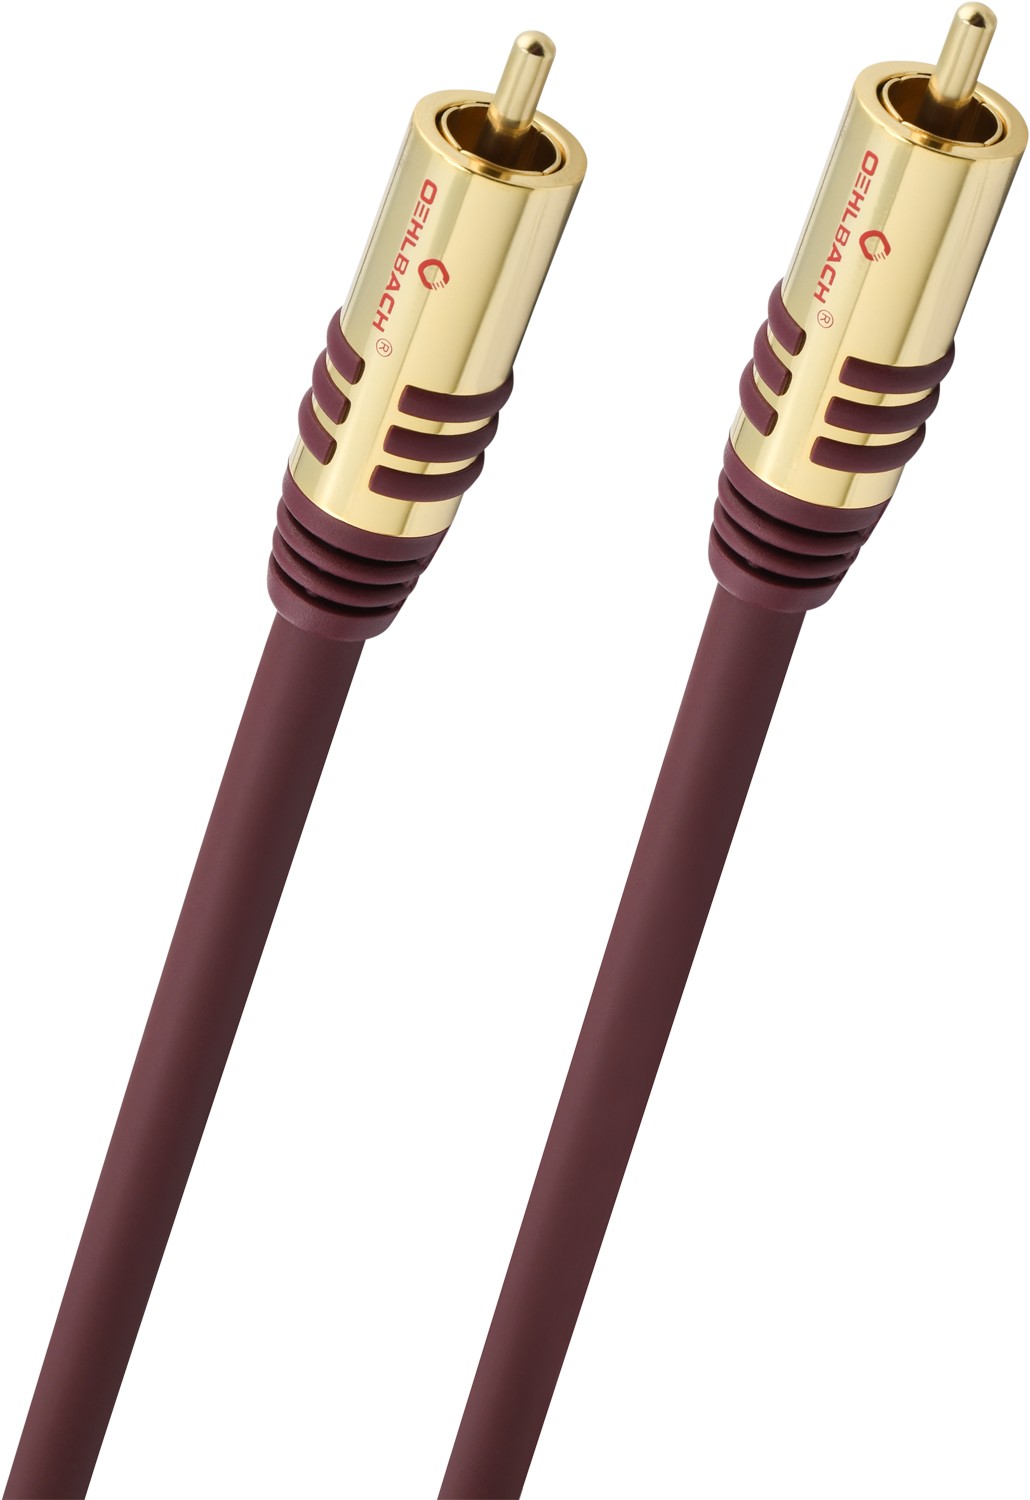 Кабели межблочные аудио Oehlbach PERFORMANCE NF Sub-cable cinch/cinch, 3.0m mono red, D1C20533 кабели межблочные аудио oehlbach excellence sub link subwoofer cable 5 0m bw d1c33162